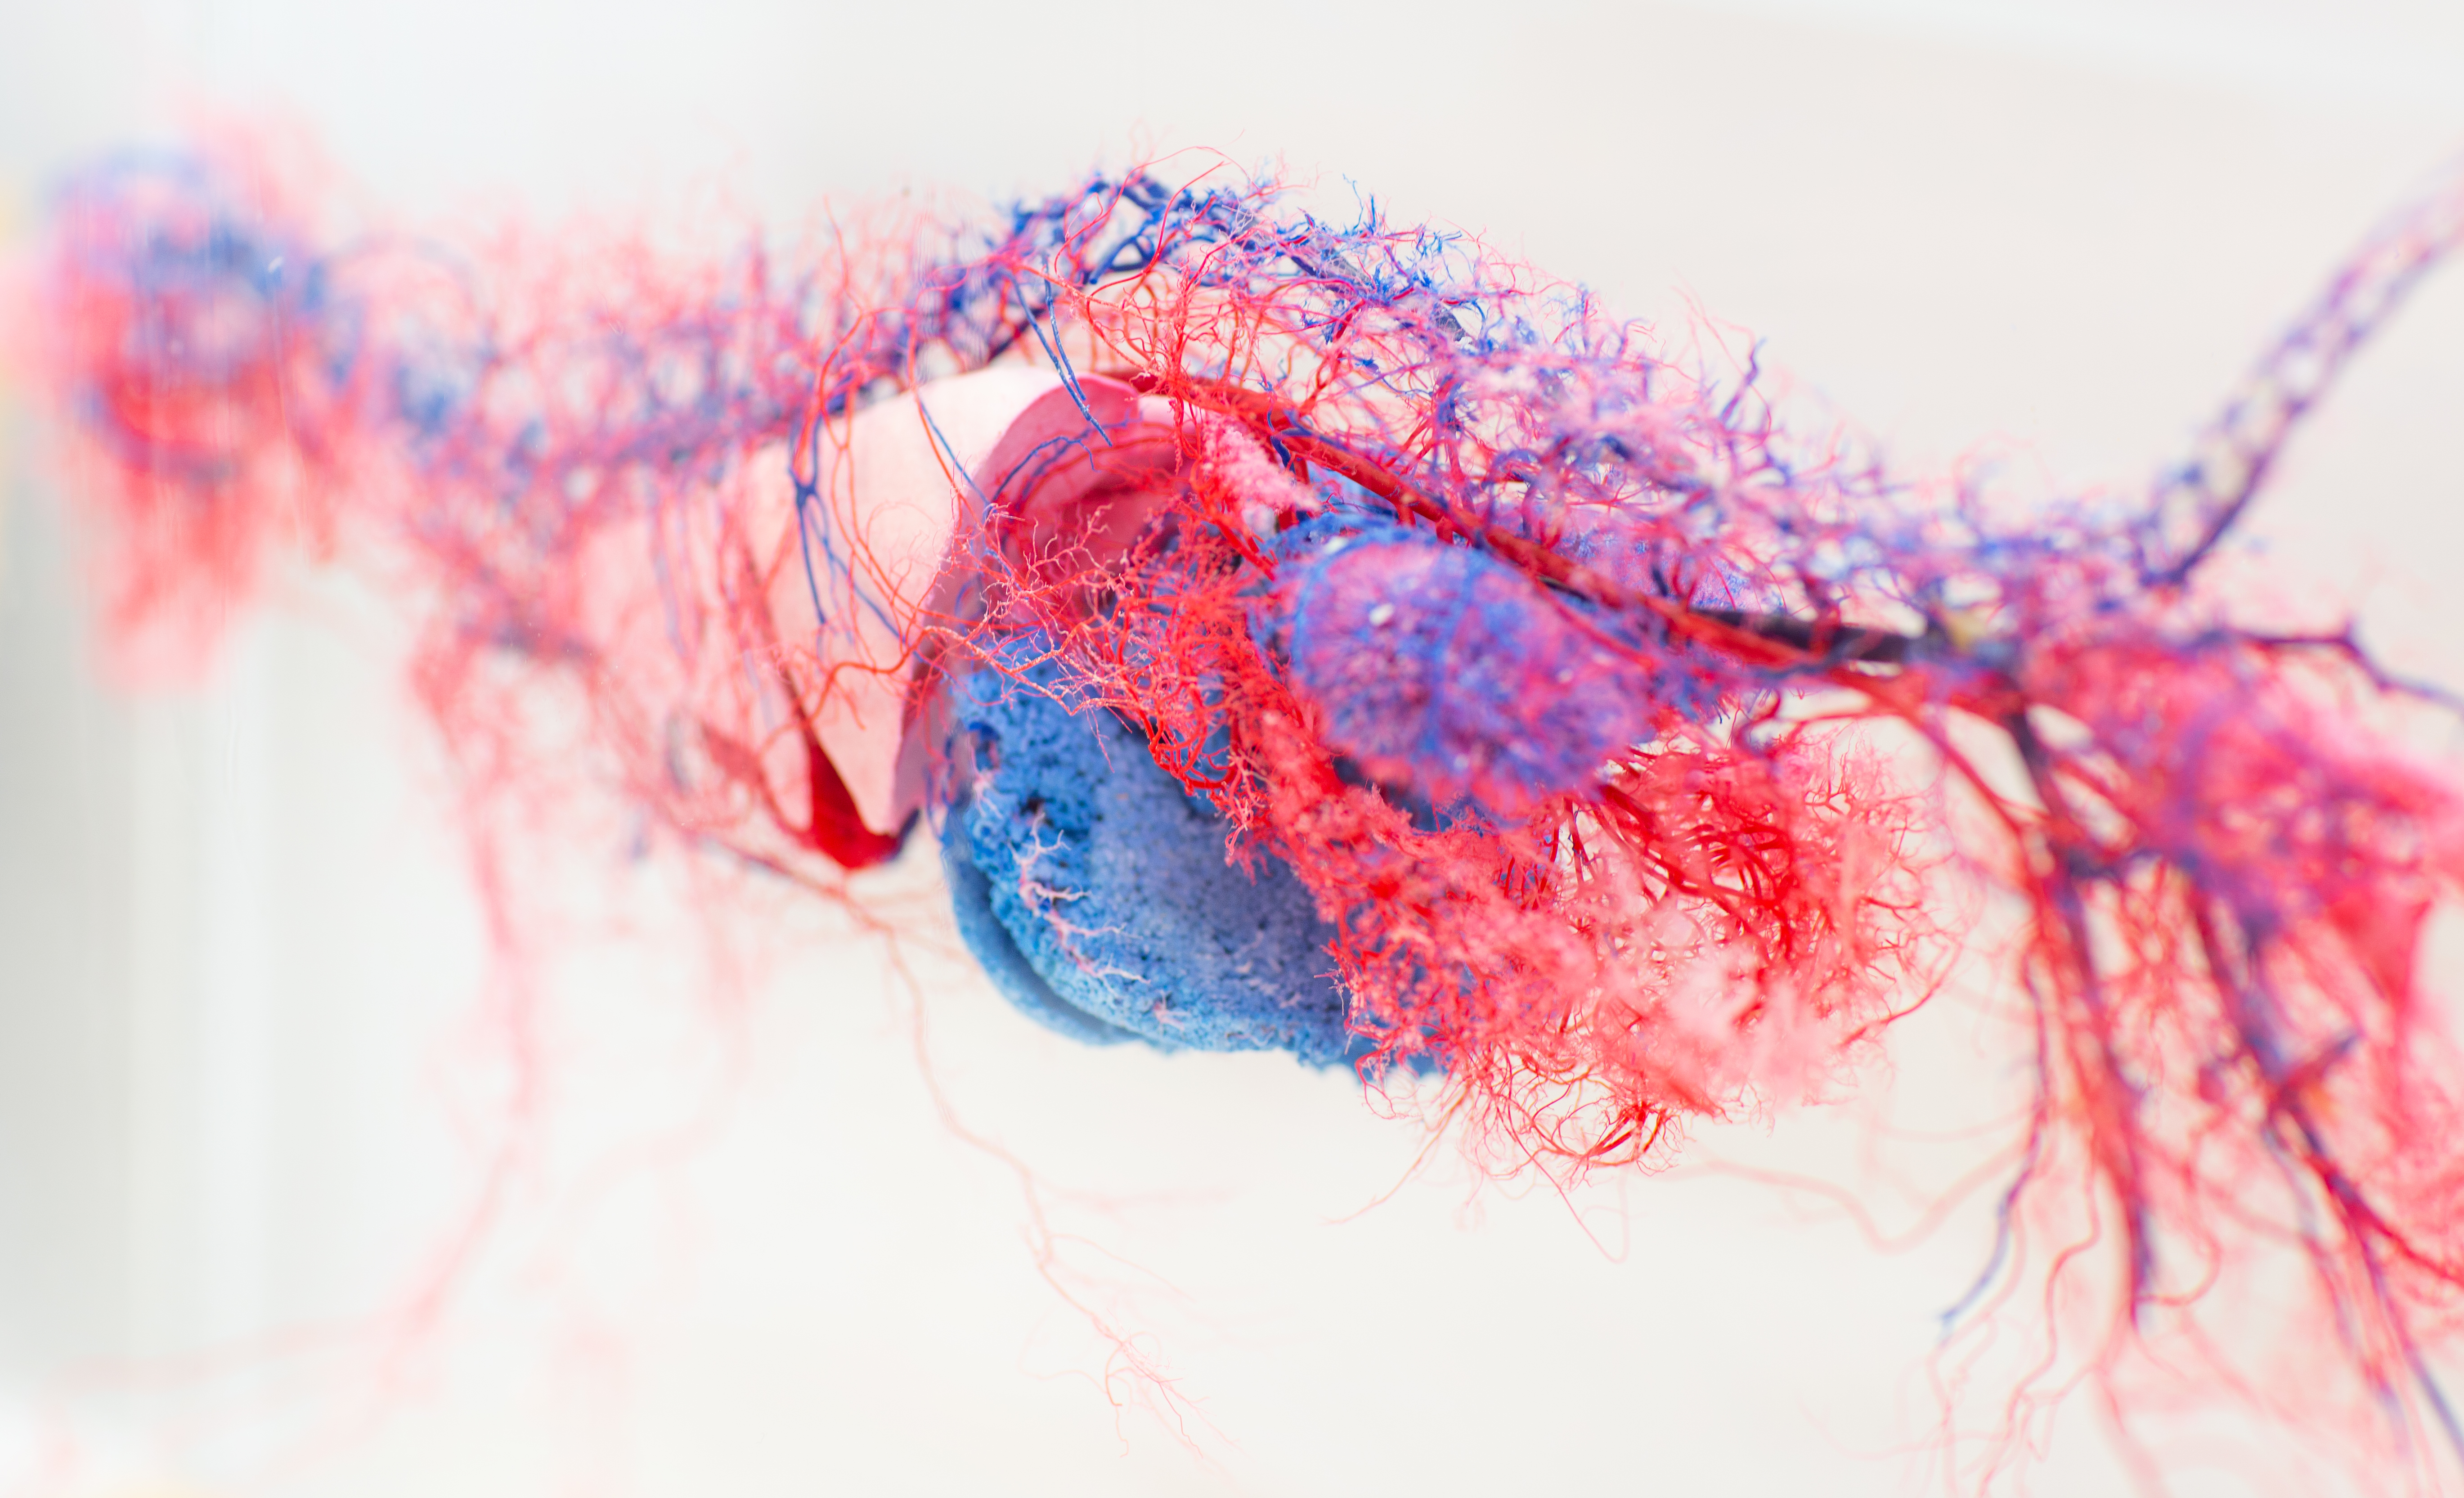 A close up of a preserved animal cardiovascular system